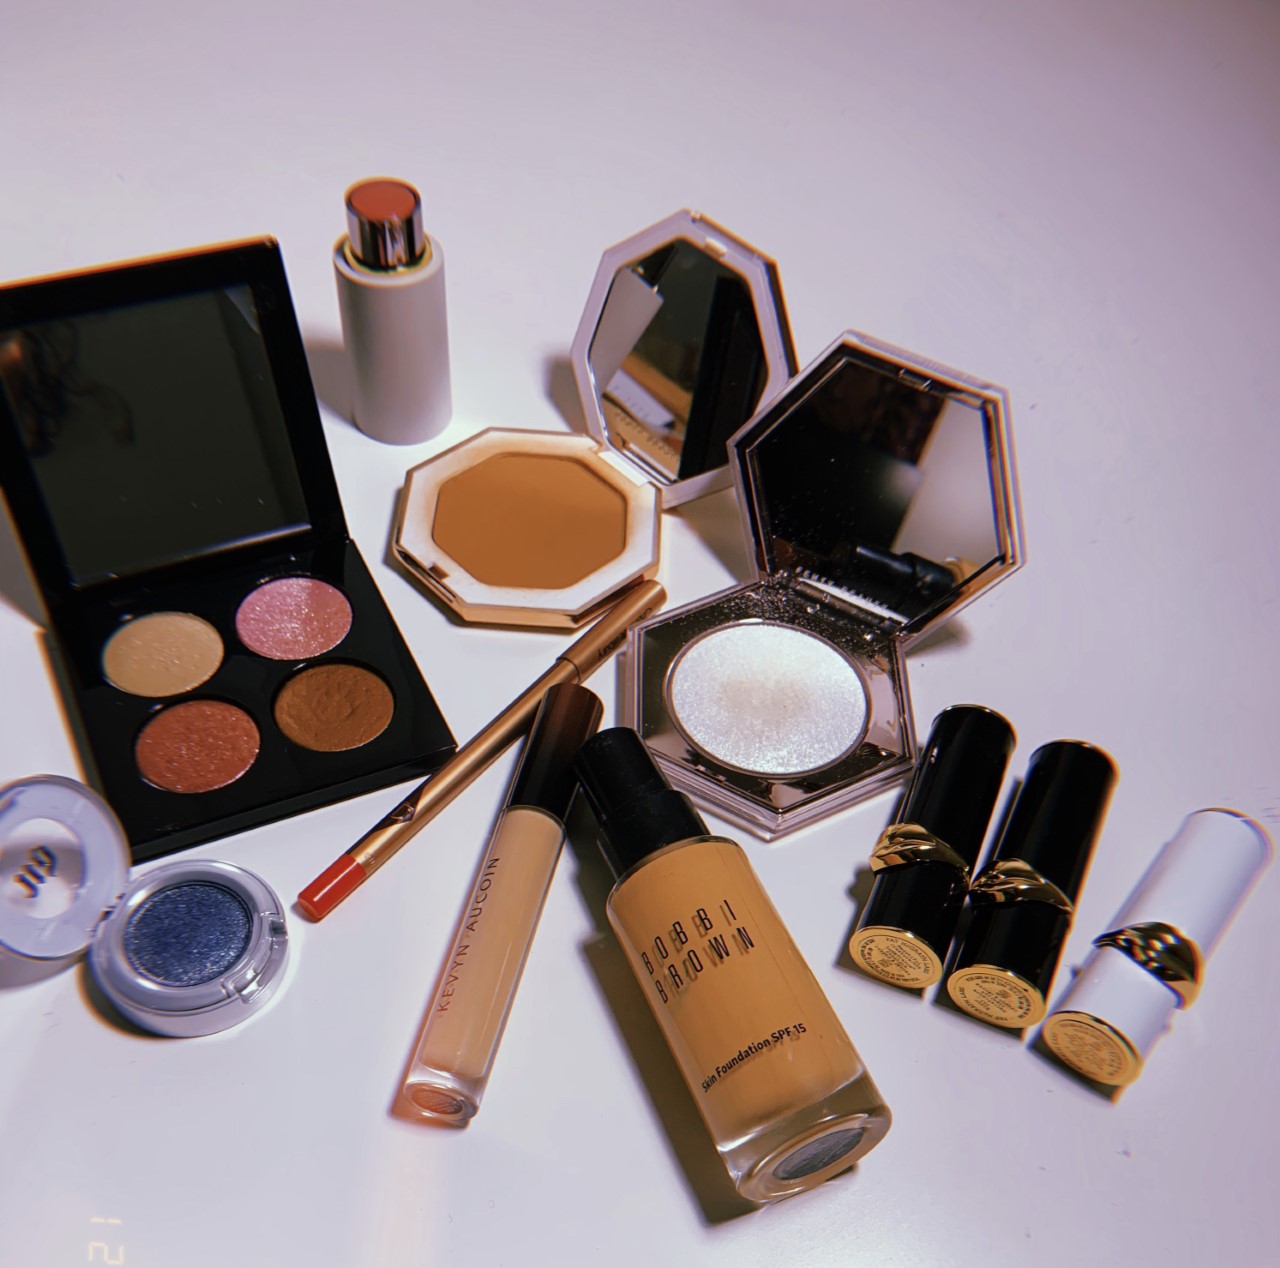 The Make-up Diaries: Chanel Healthy Glow All in One Fluid and My